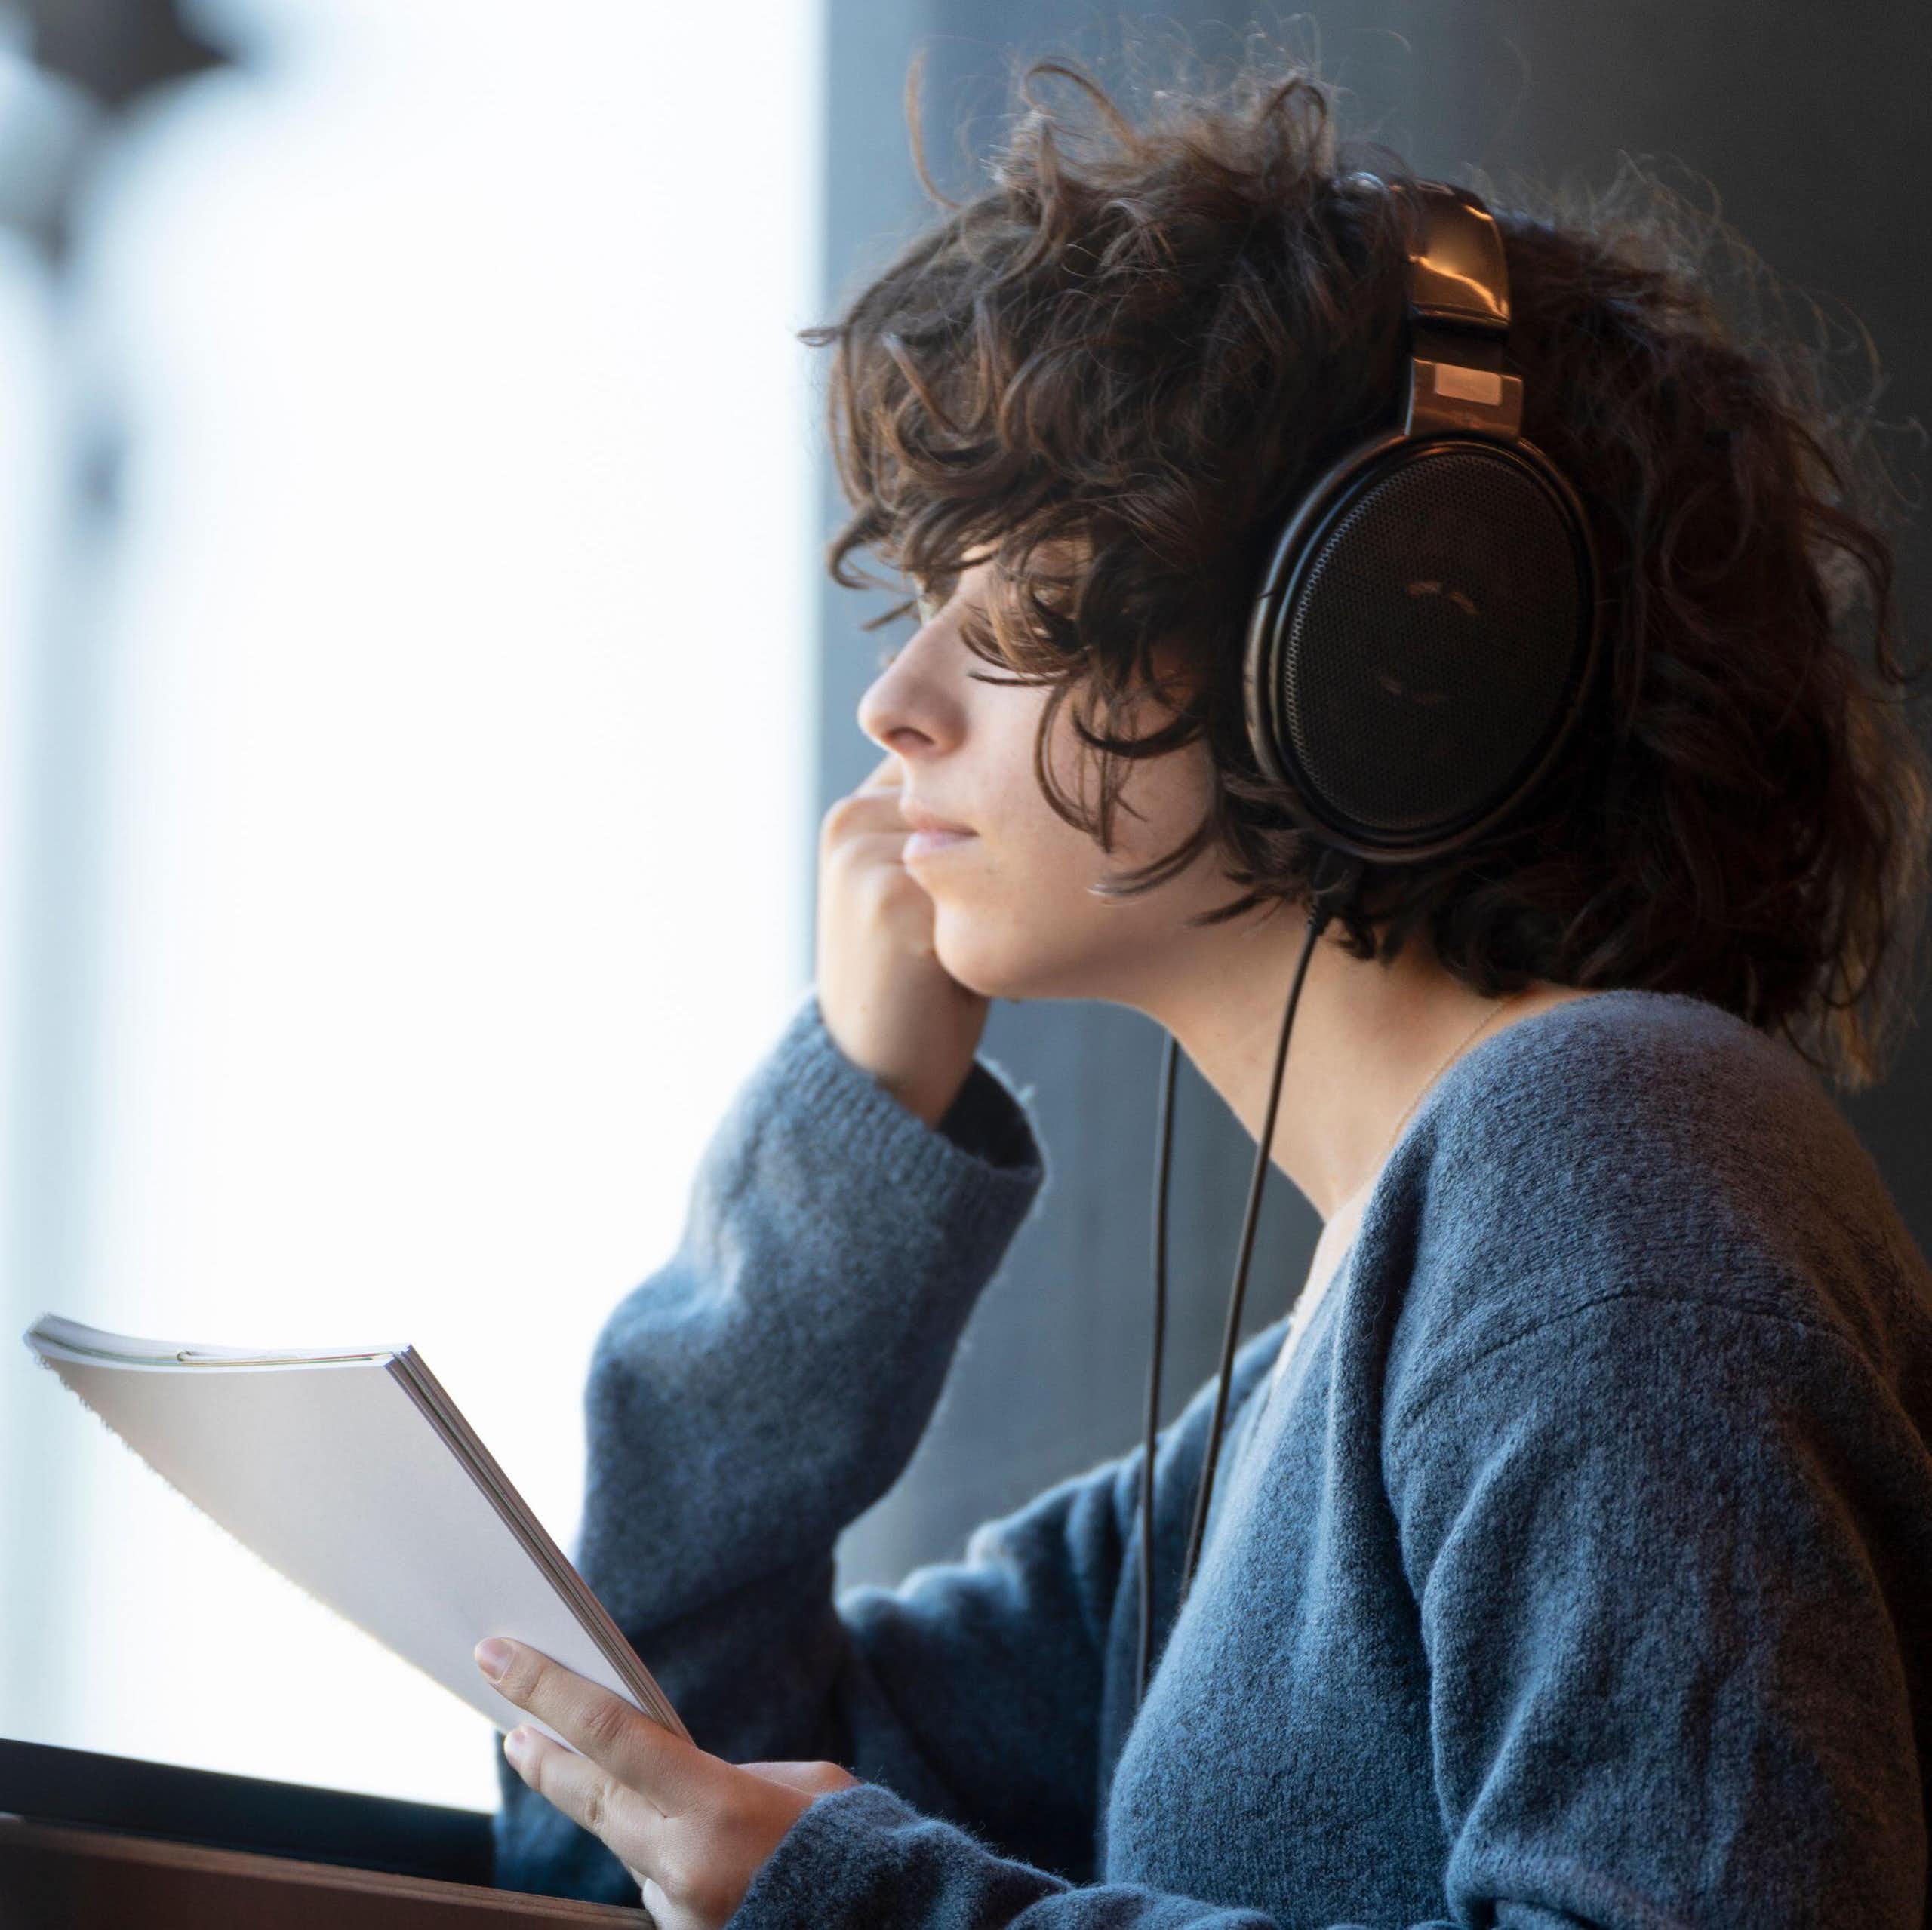 A woman listening to headphones with a neutral expression